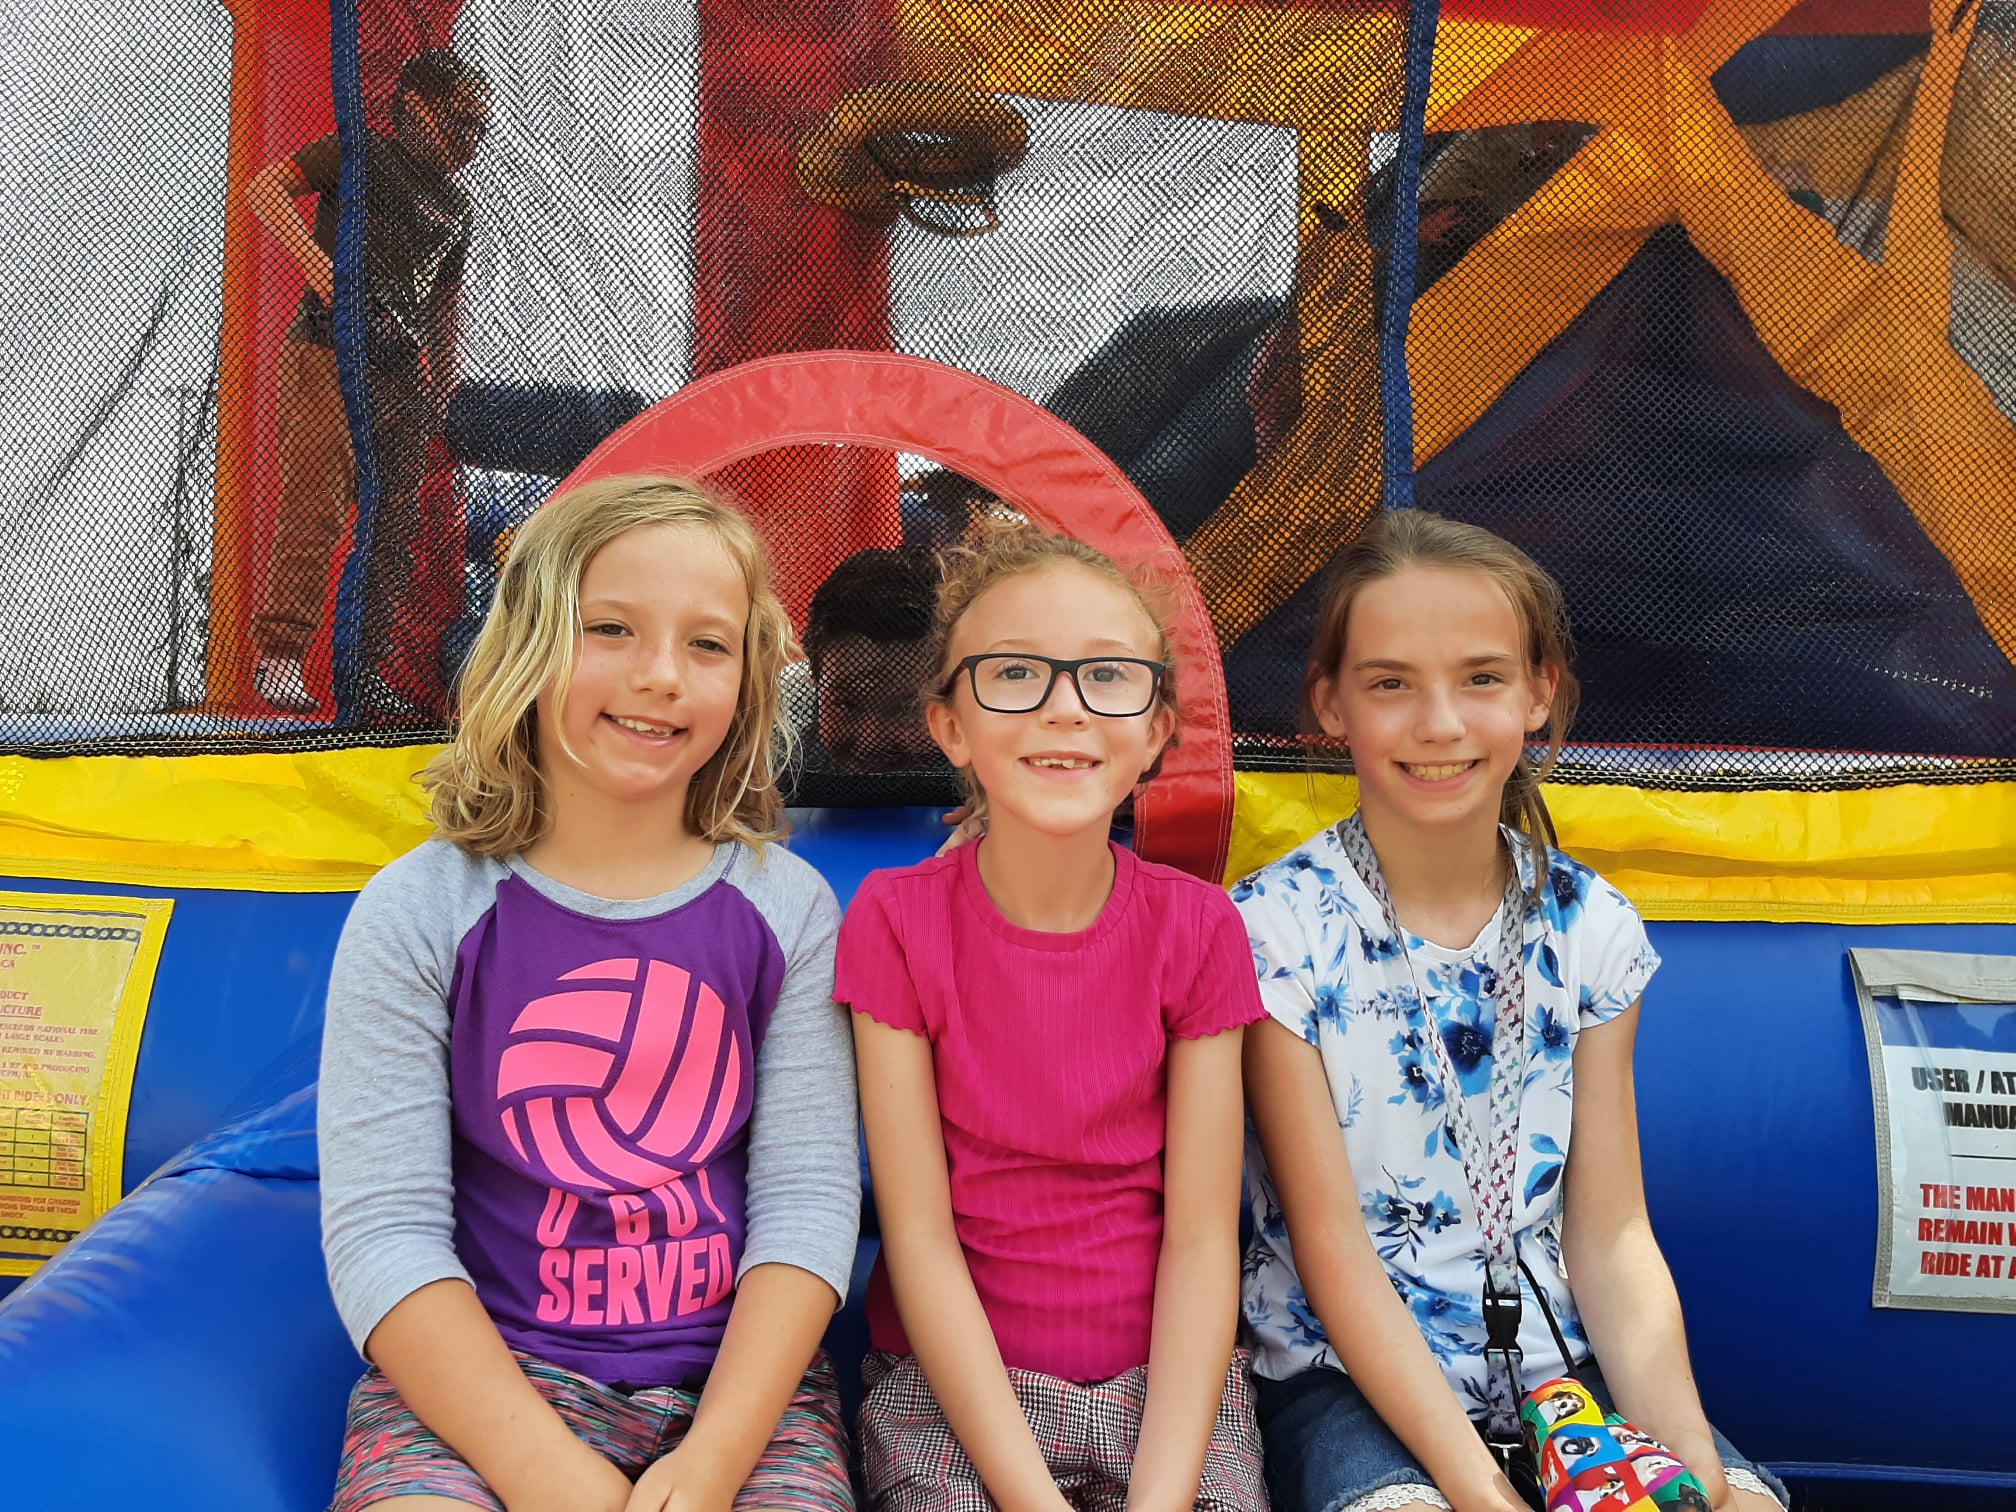 Girls sitting on a bounce house.